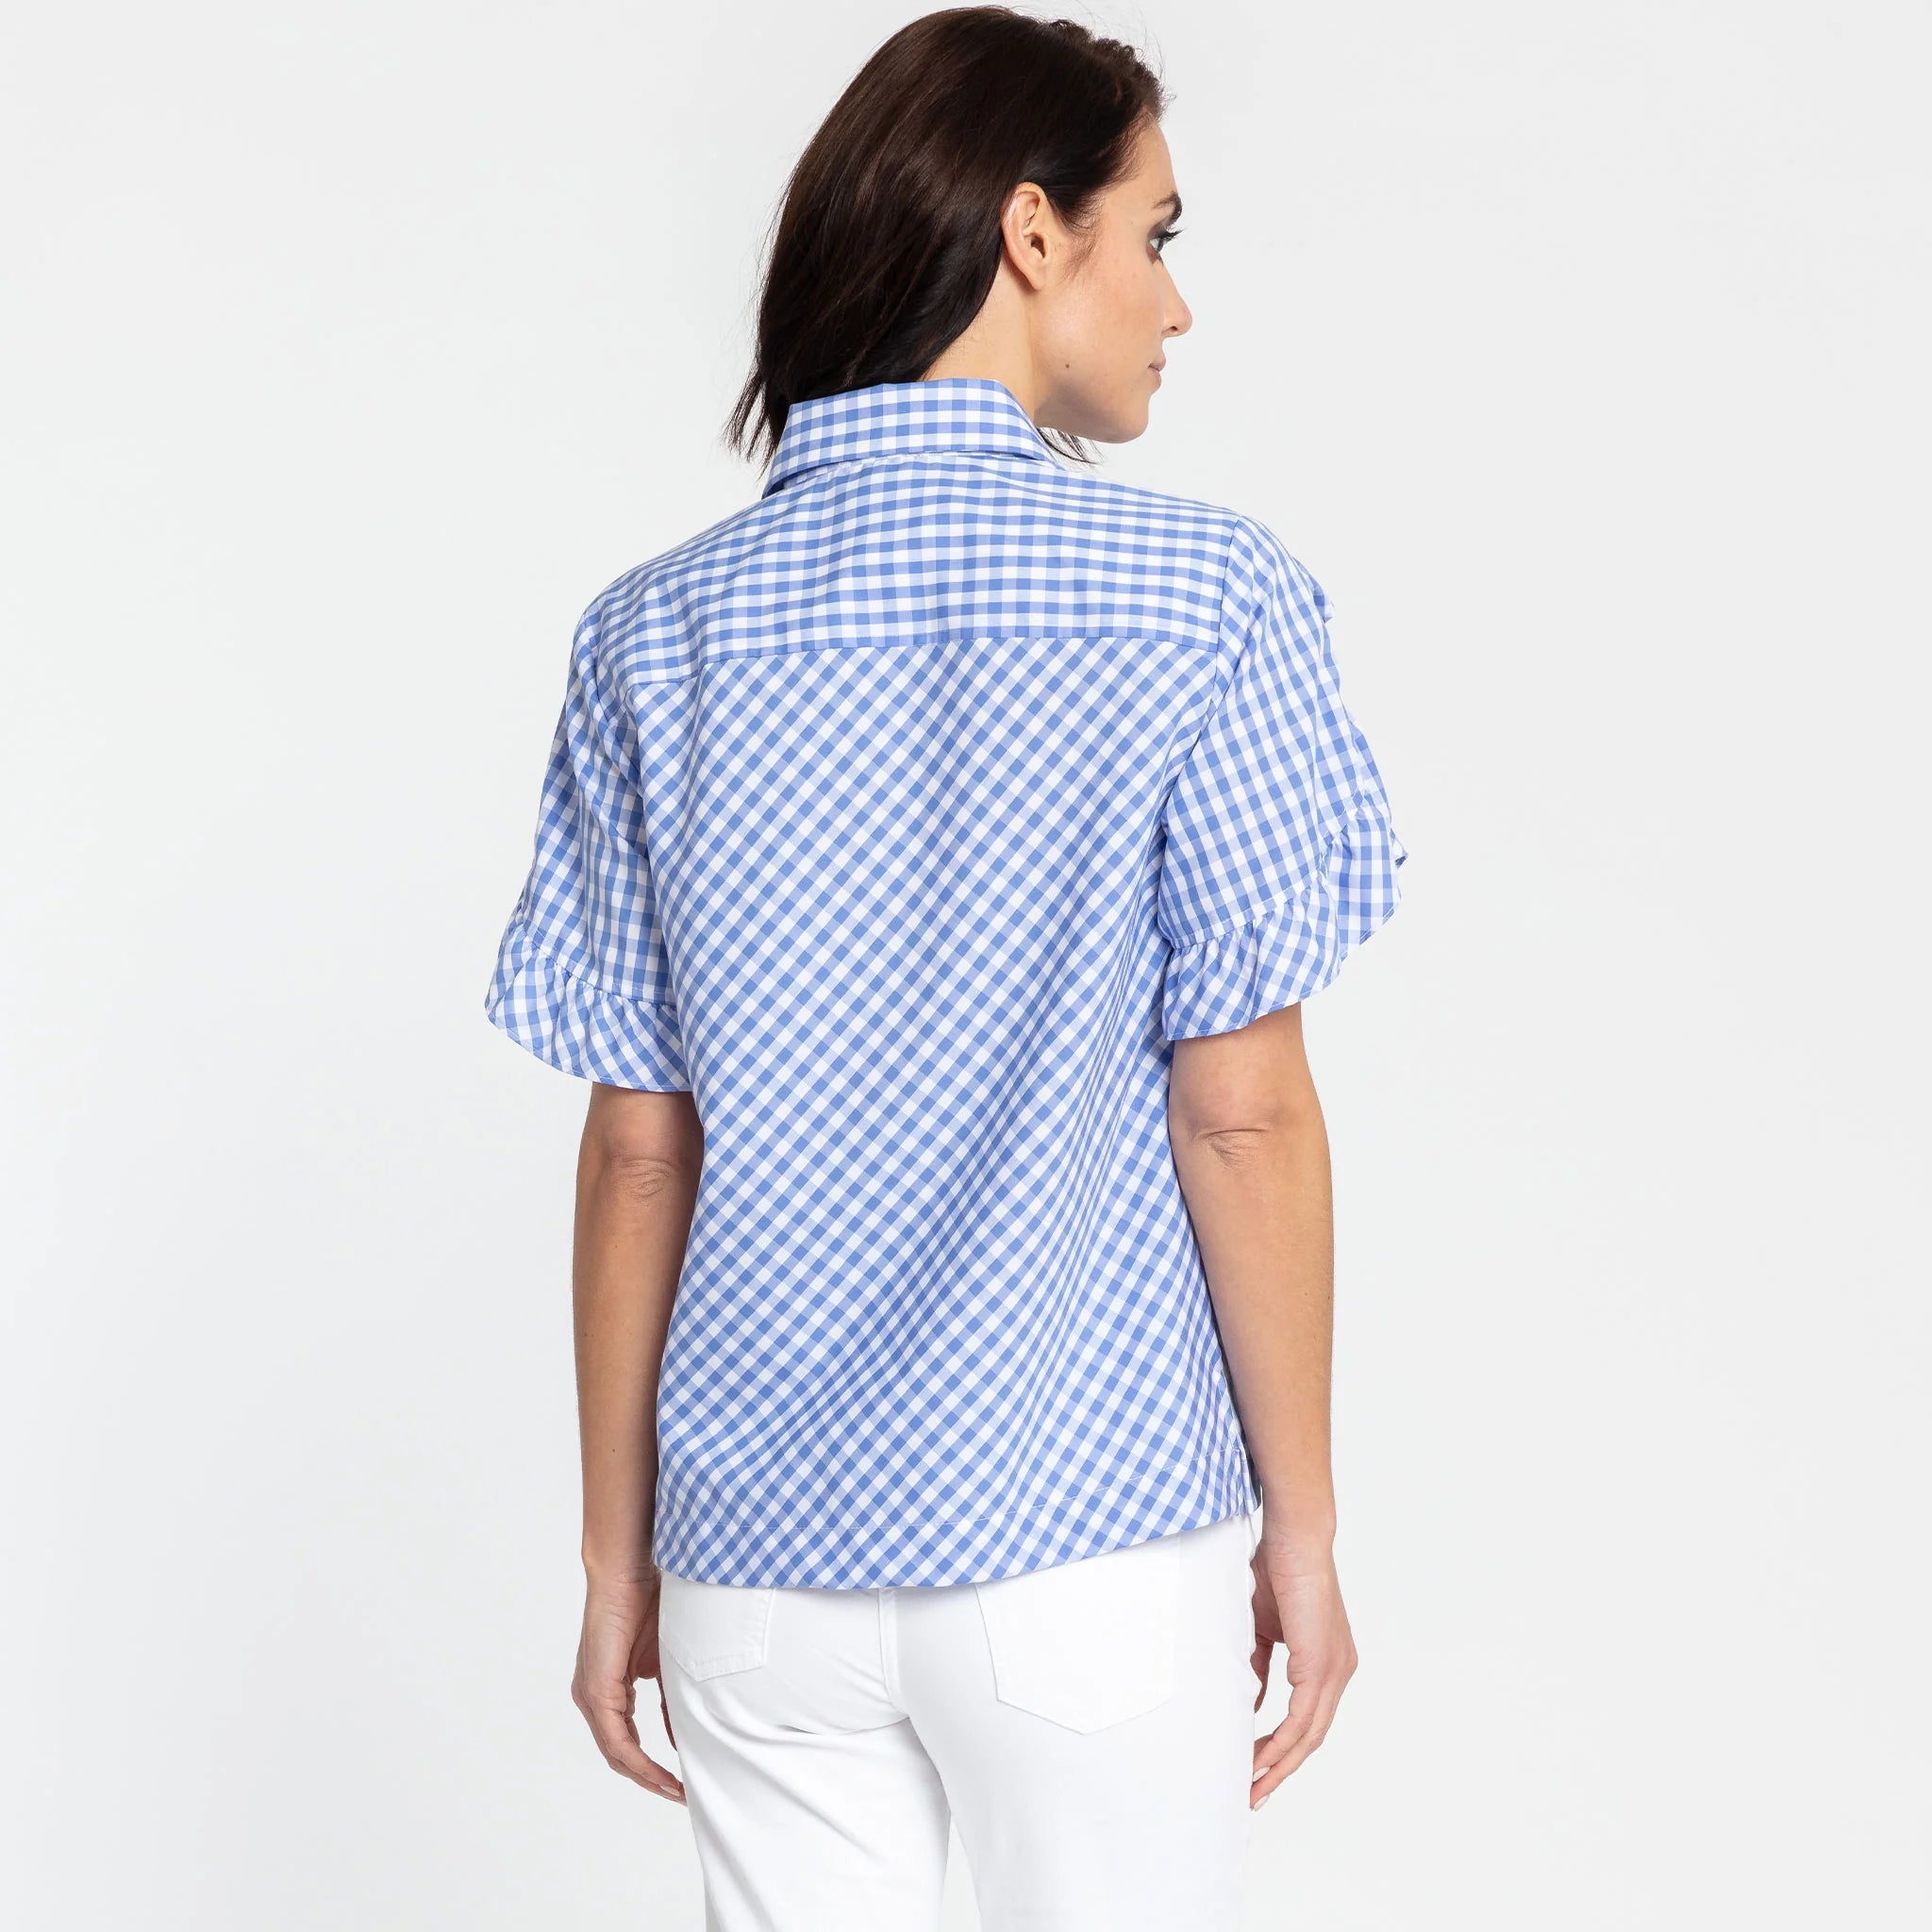 Classic White Top - Button-Up Top - Short Sleeve Top - Top - Lulus